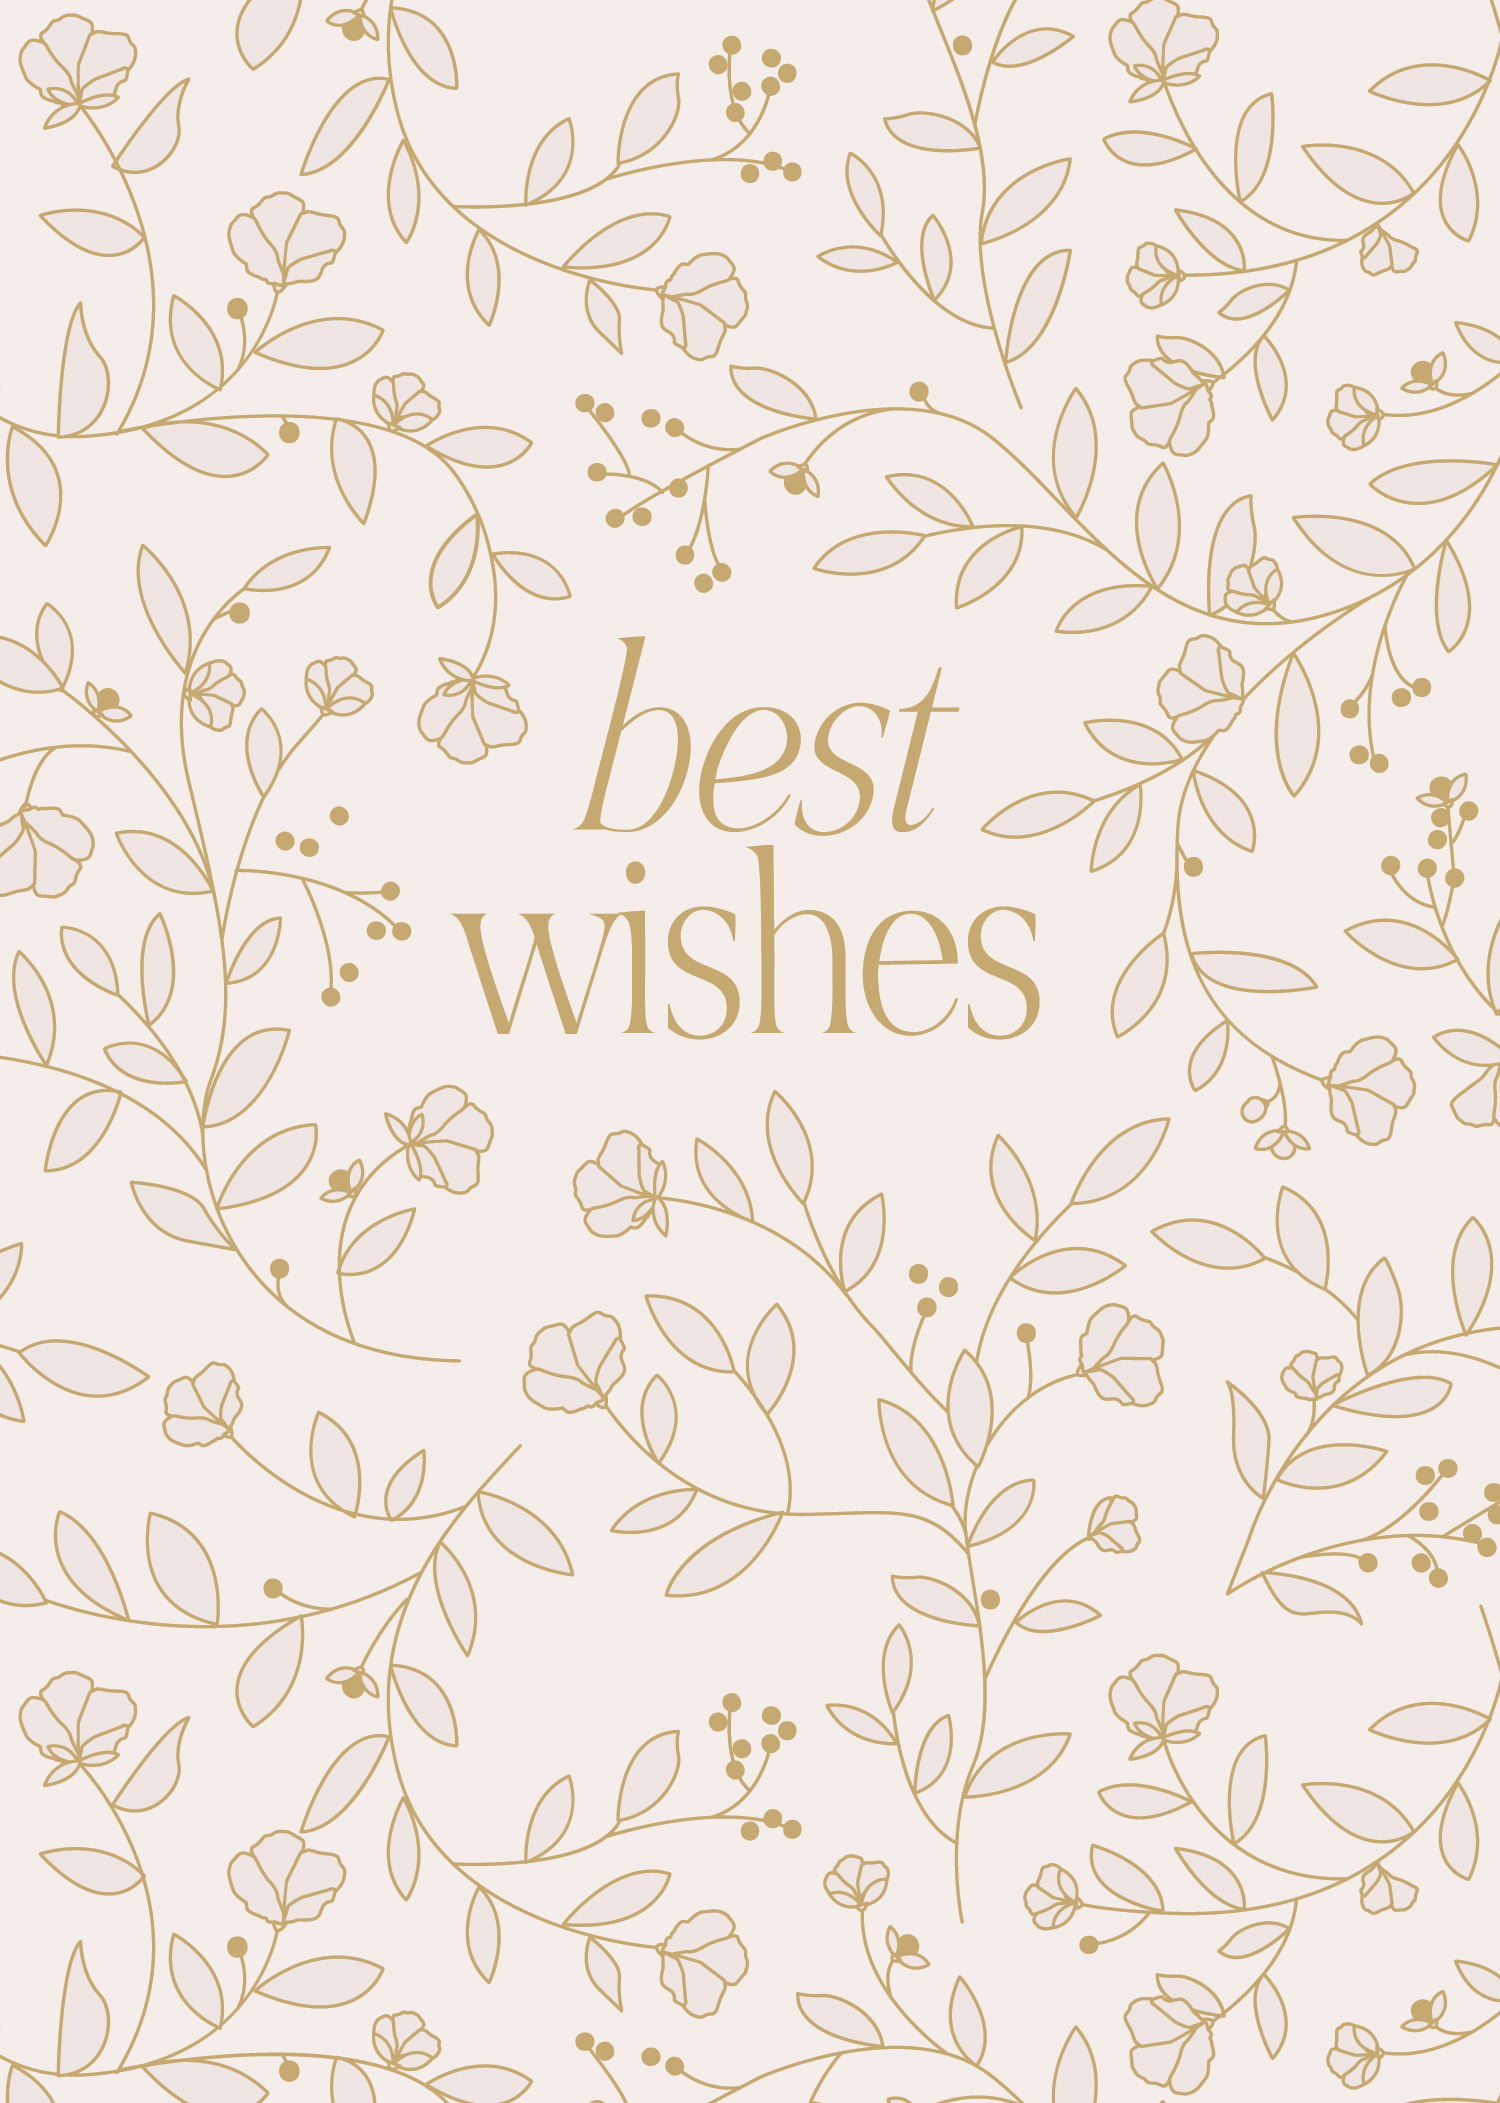 Greeting Card Blushing Floral- Best Wishes